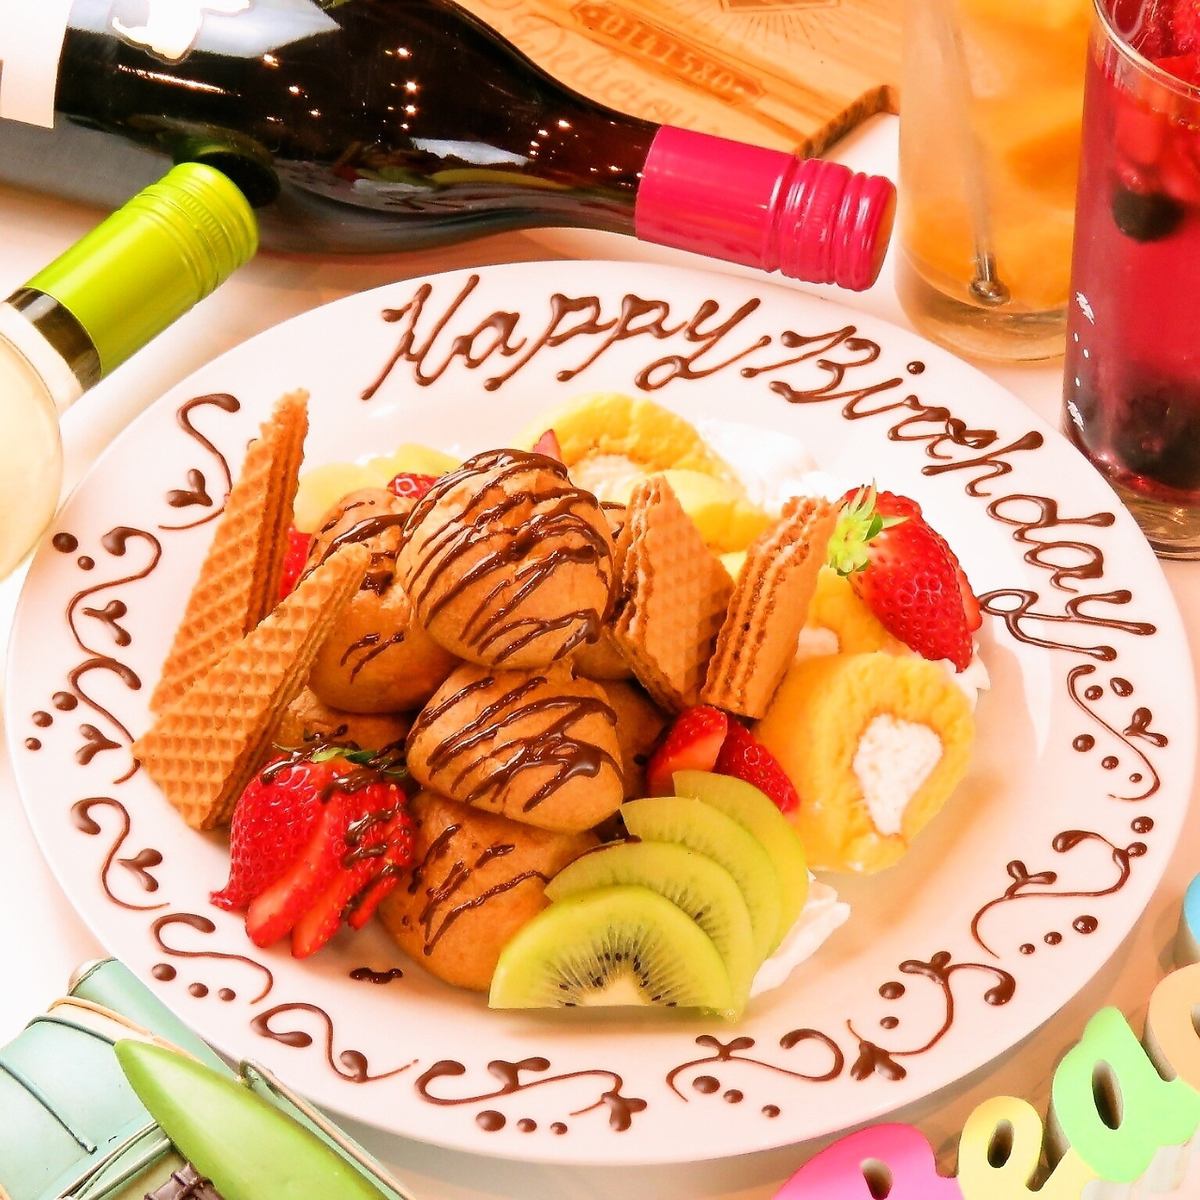 There is a message dessert plate ♪ You can also bring cake ★